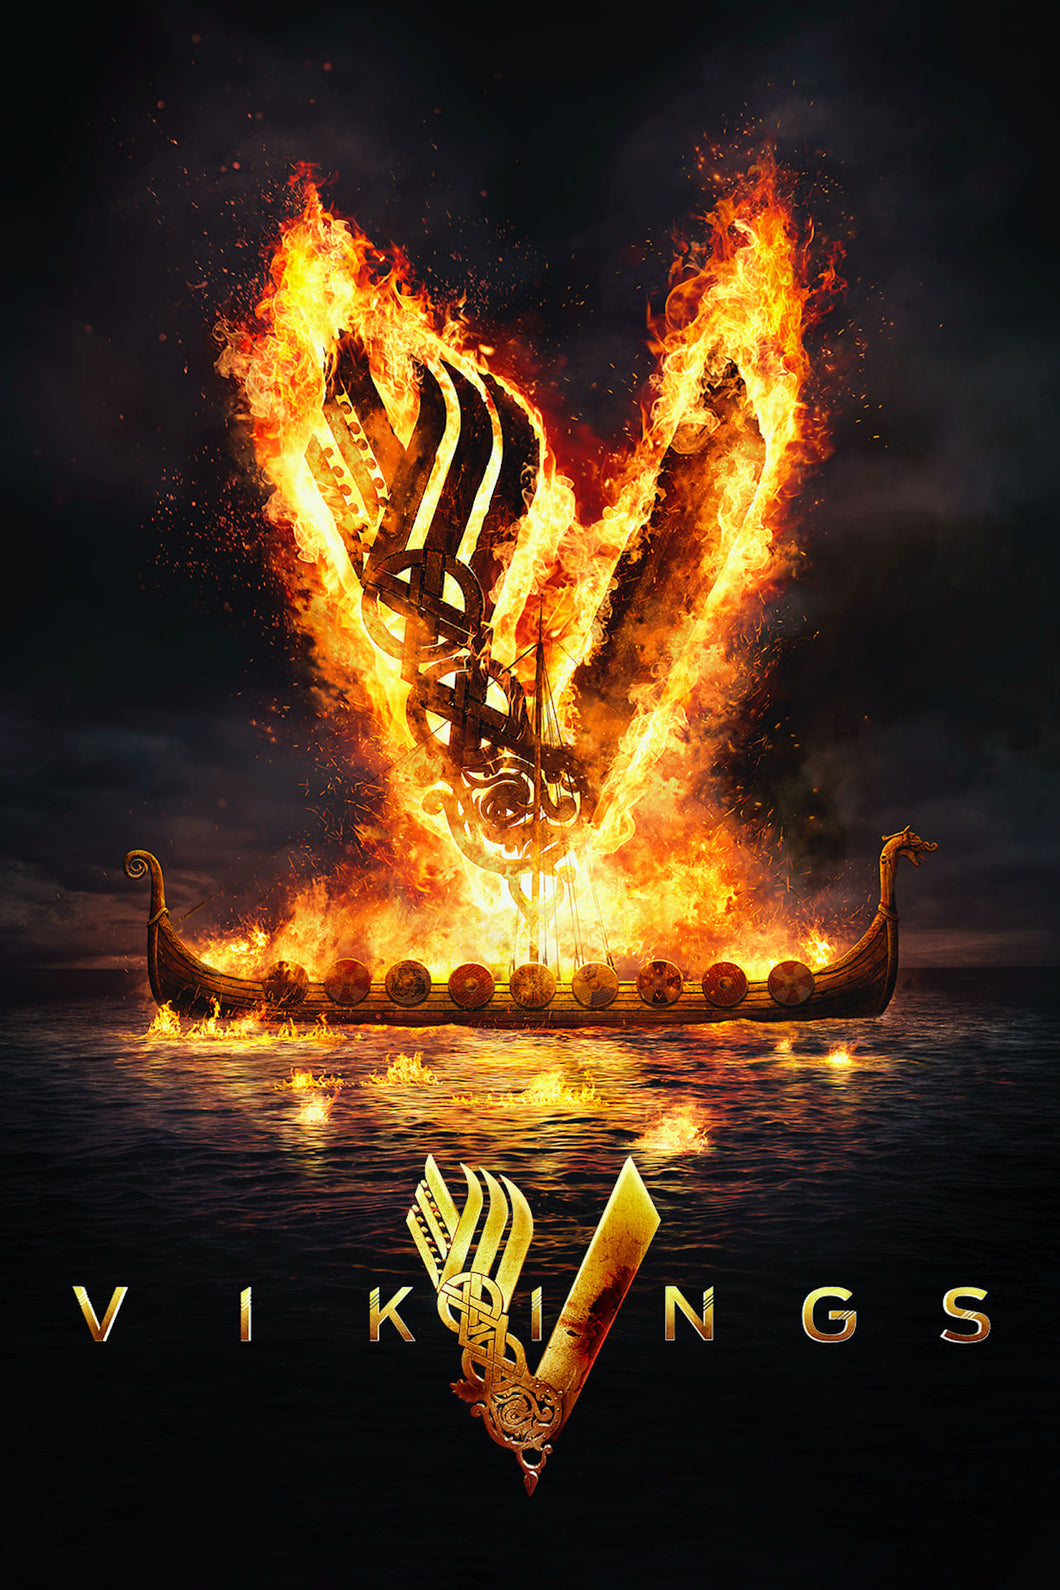 Vikings v5 TV Series High Quality Glossy Paper A1 A2 A3 A4 A3 Framed or Unframed!!!